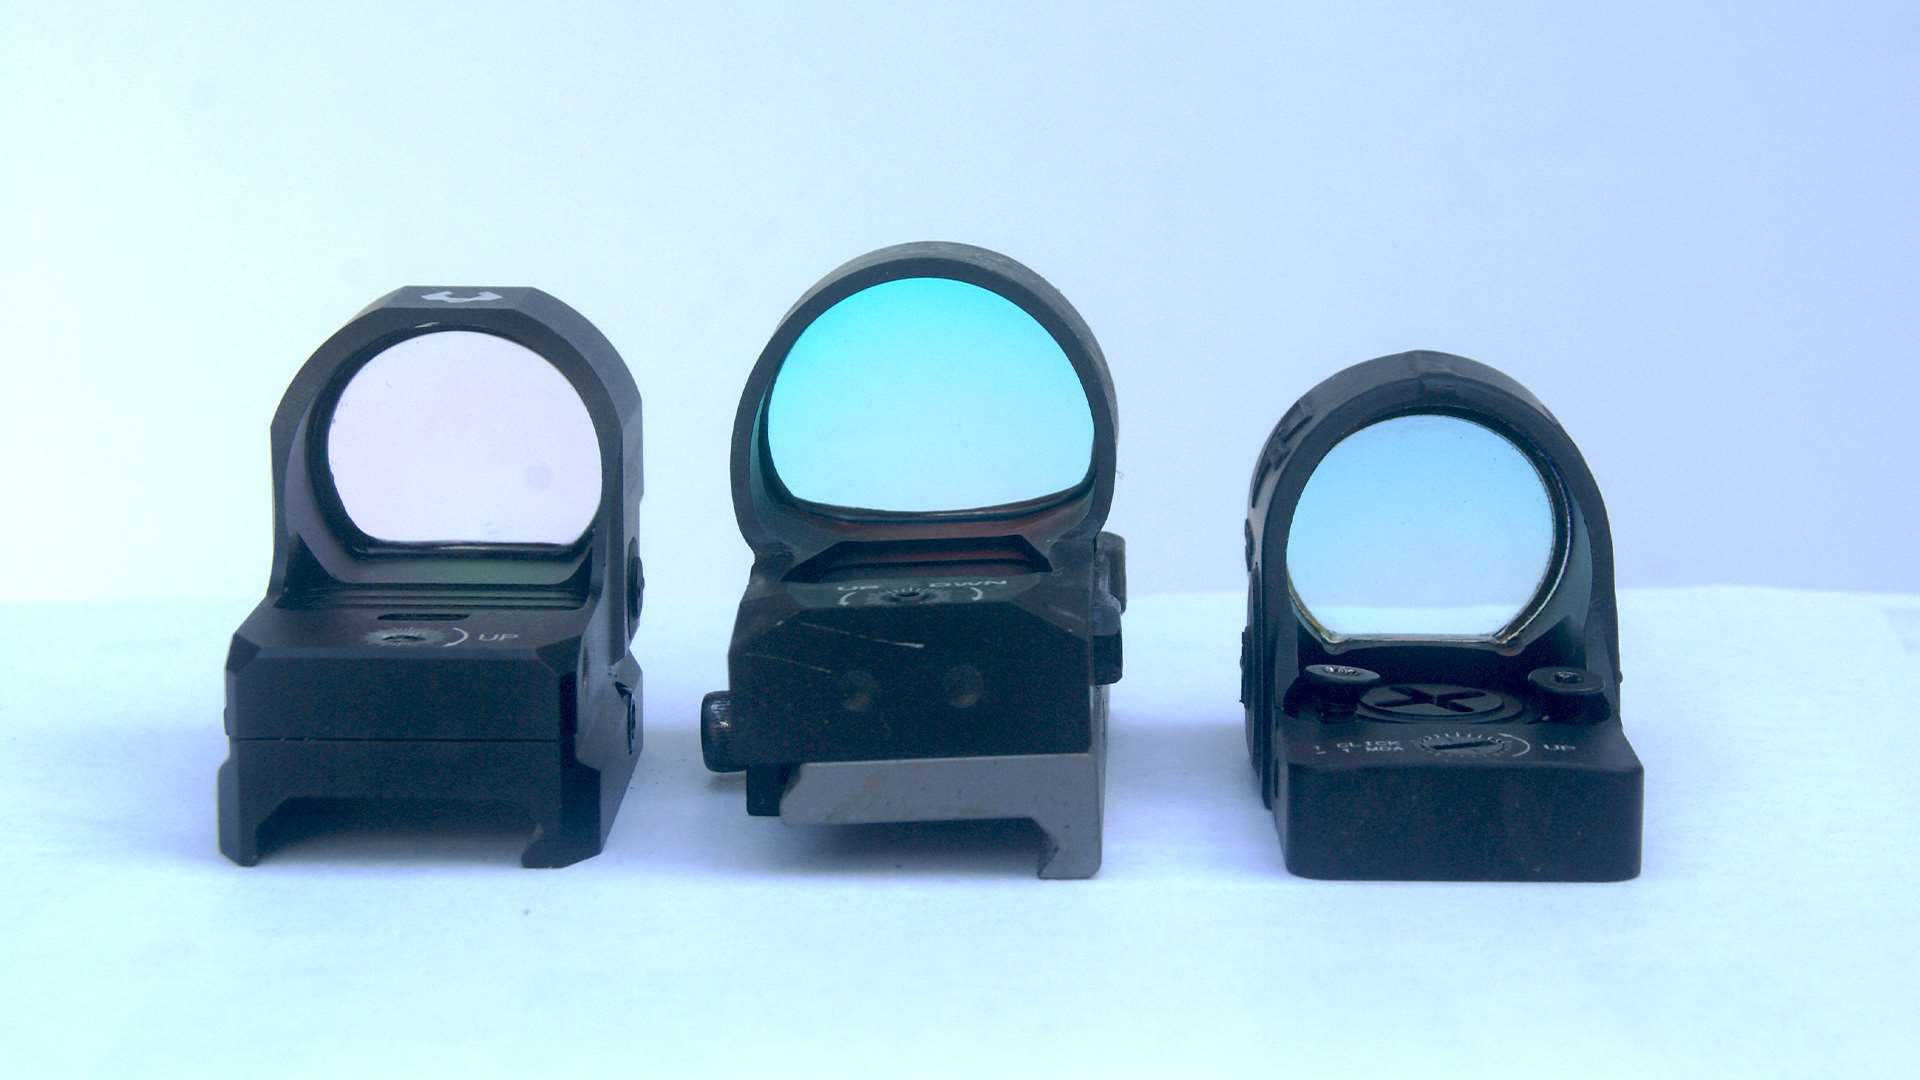 RFX35 compared to other optics